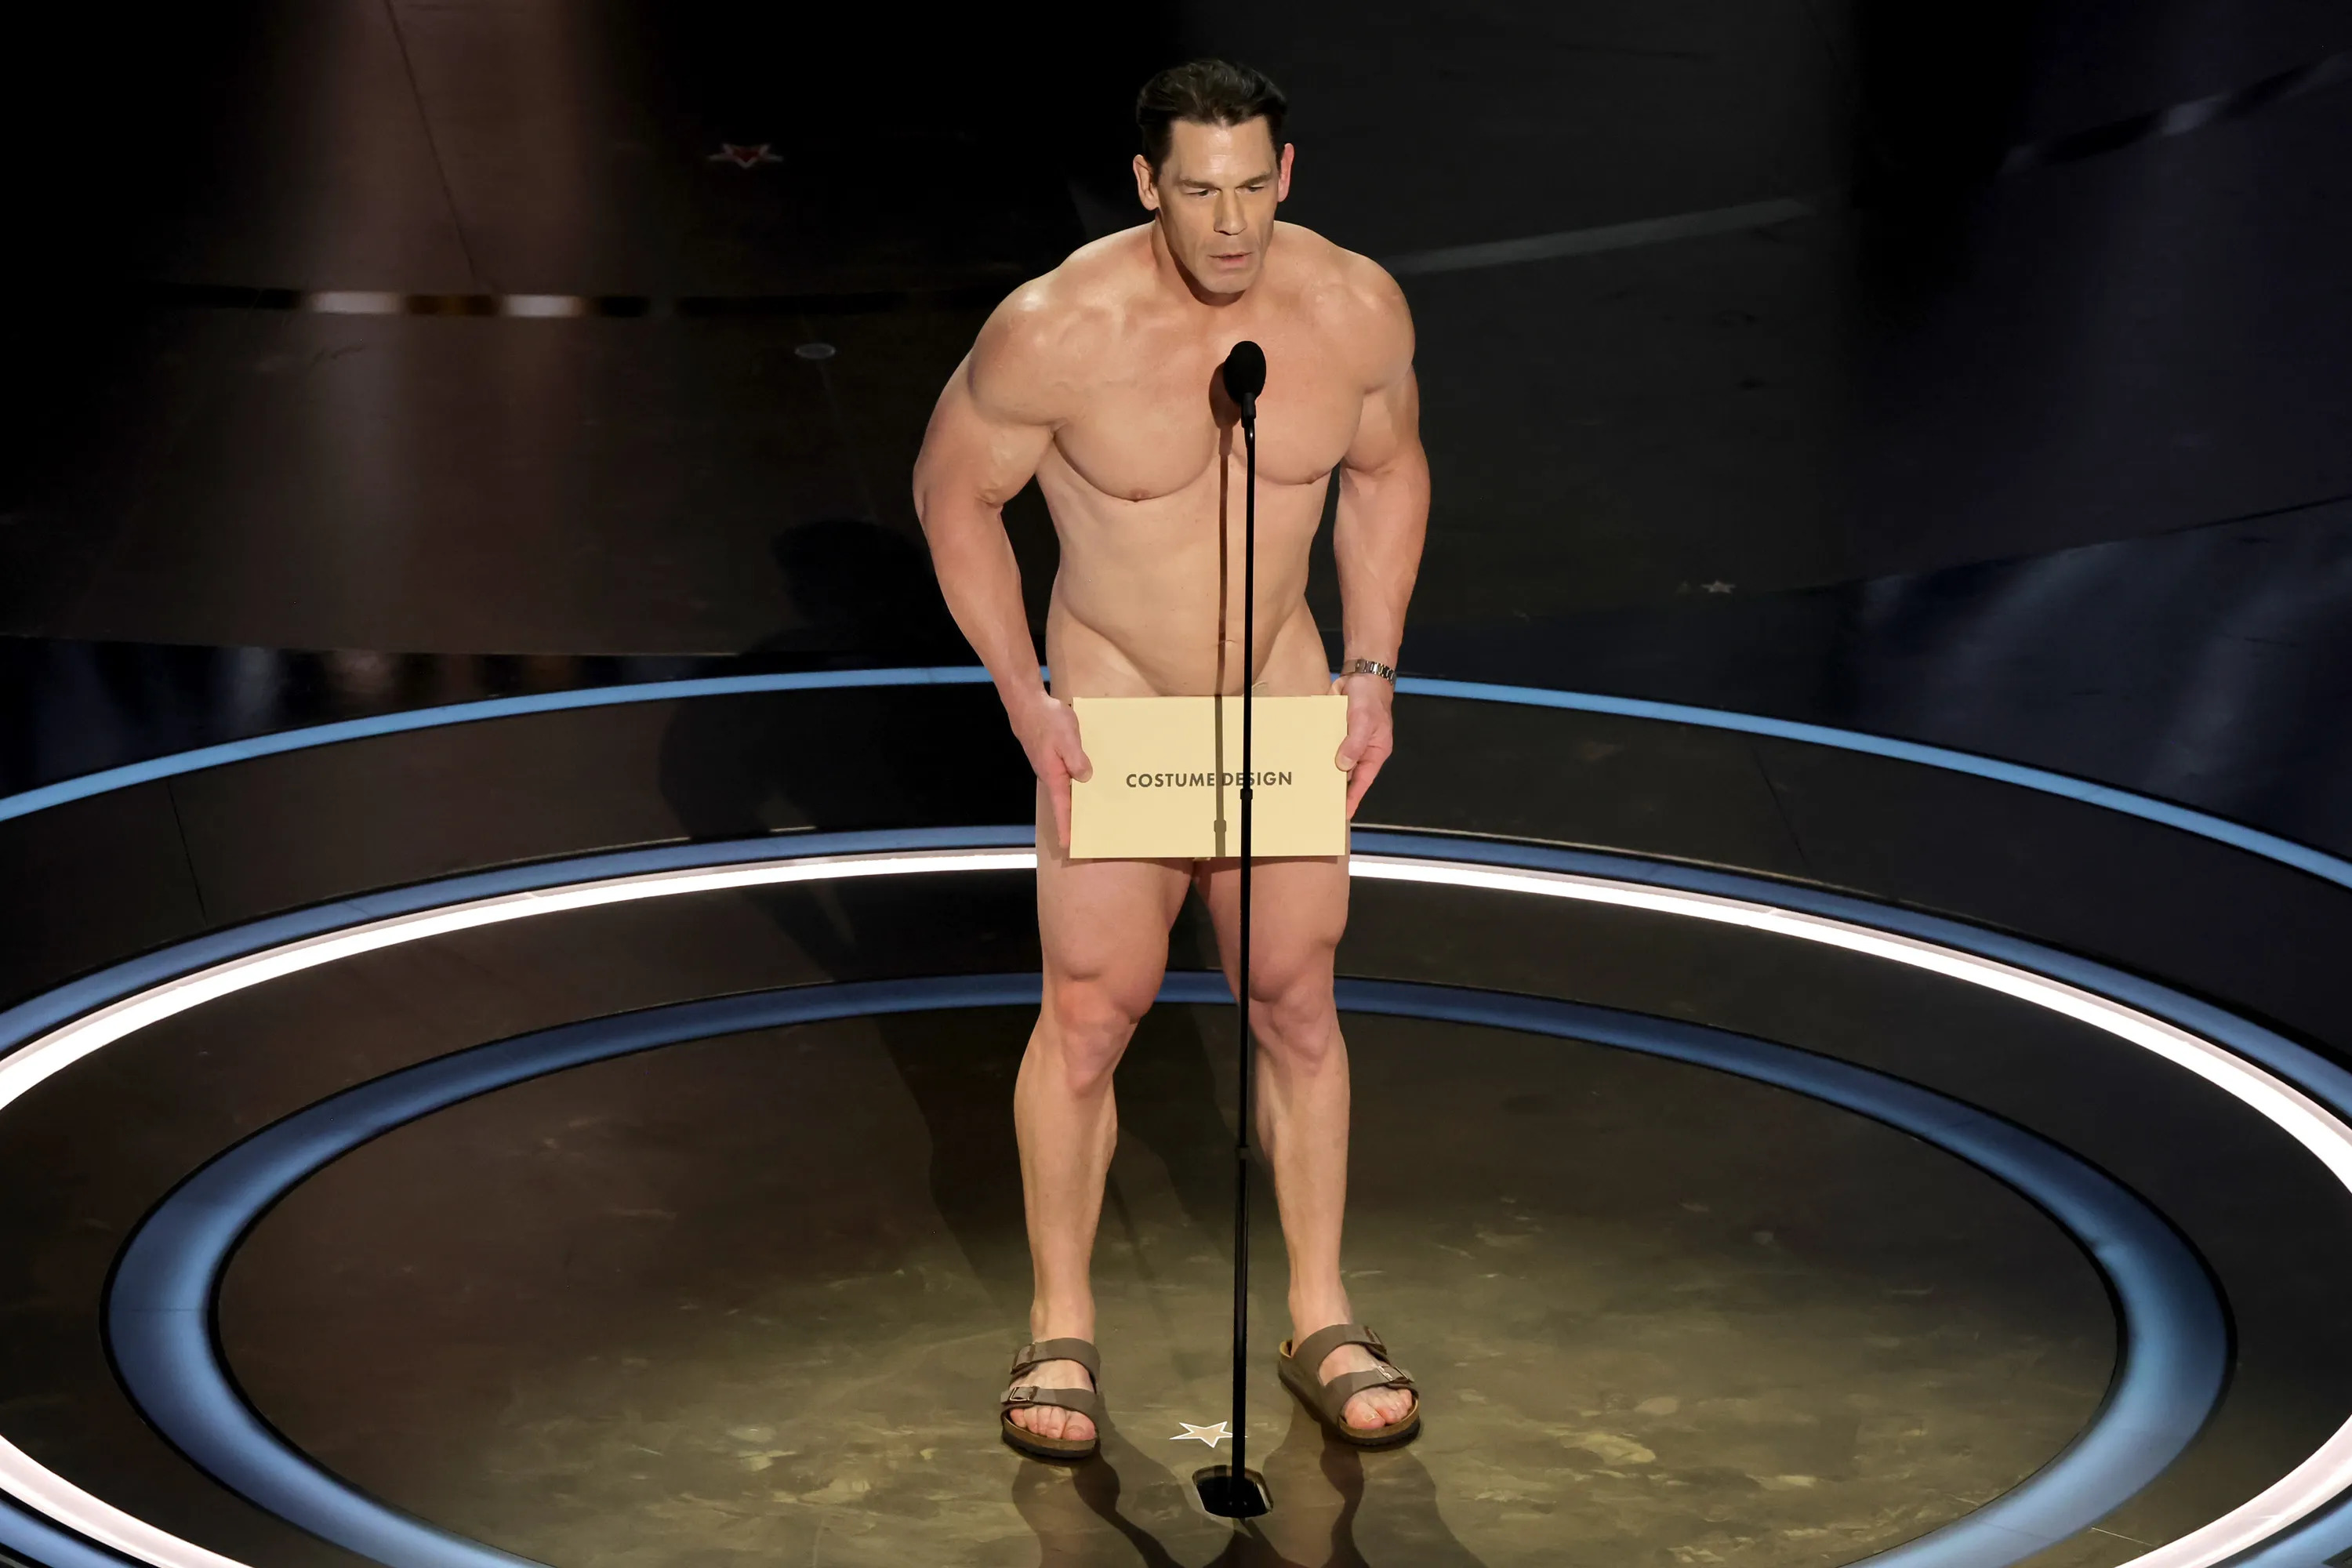 John Cena appears onstage to present the award for Best Costume Design at the 96th Academy Awards at the Dolby Theatre in Hollywood, California on March 10, 2024.